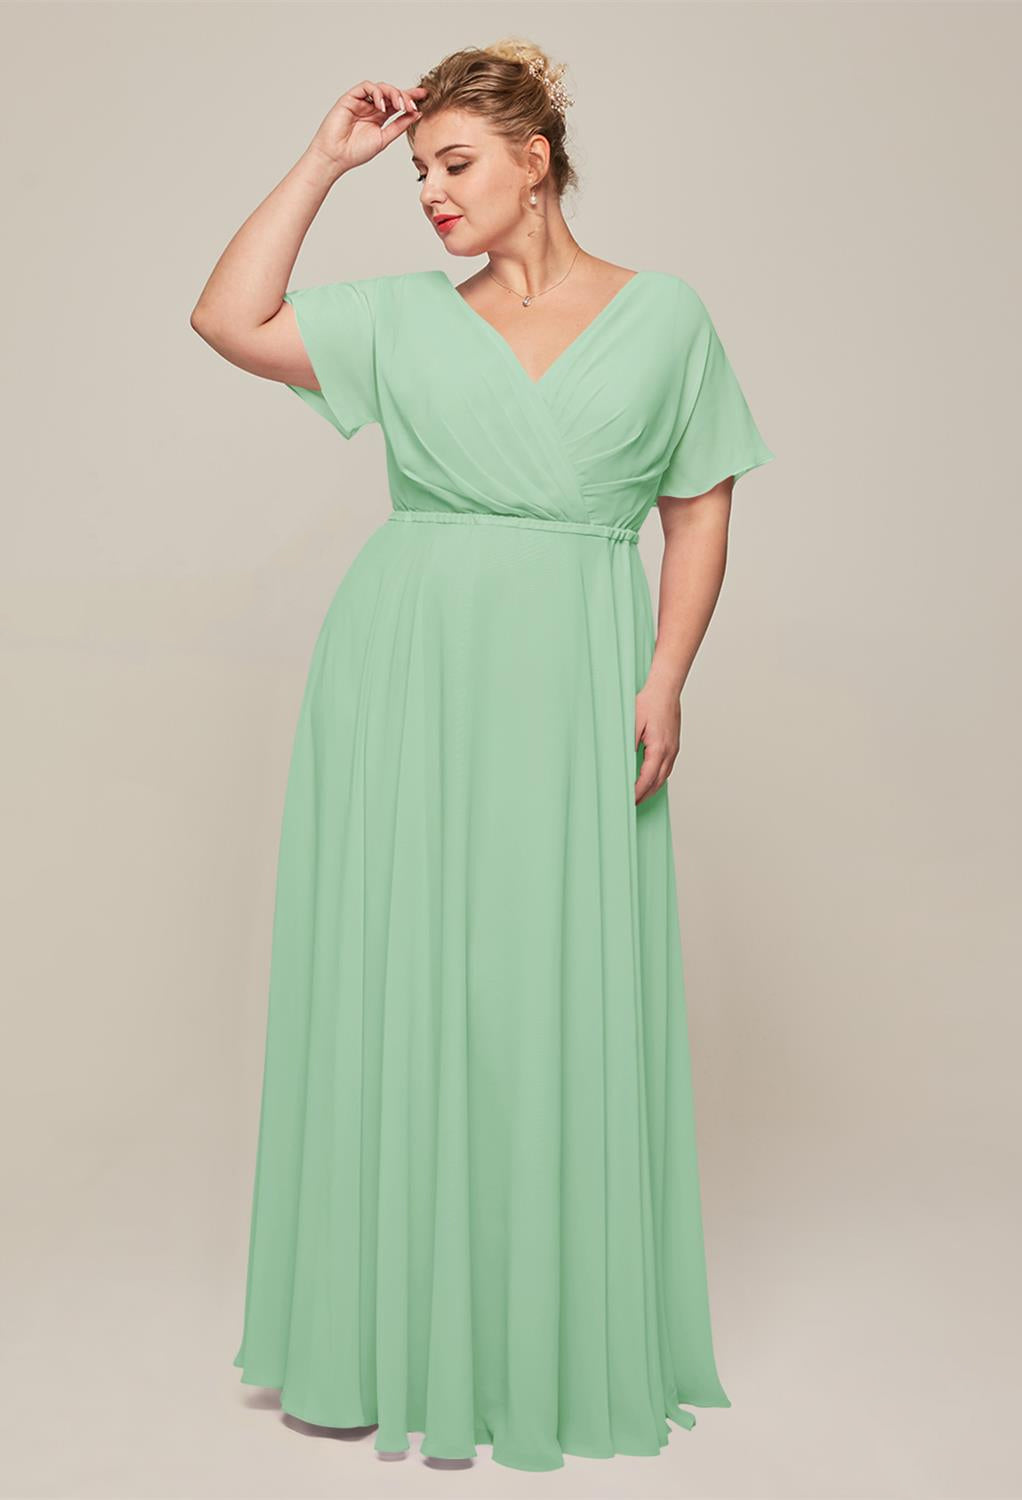 A Ginny - Chiffon Bridesmaid Dress - Off The Rack in mint green is available at Bergamot Bridal.